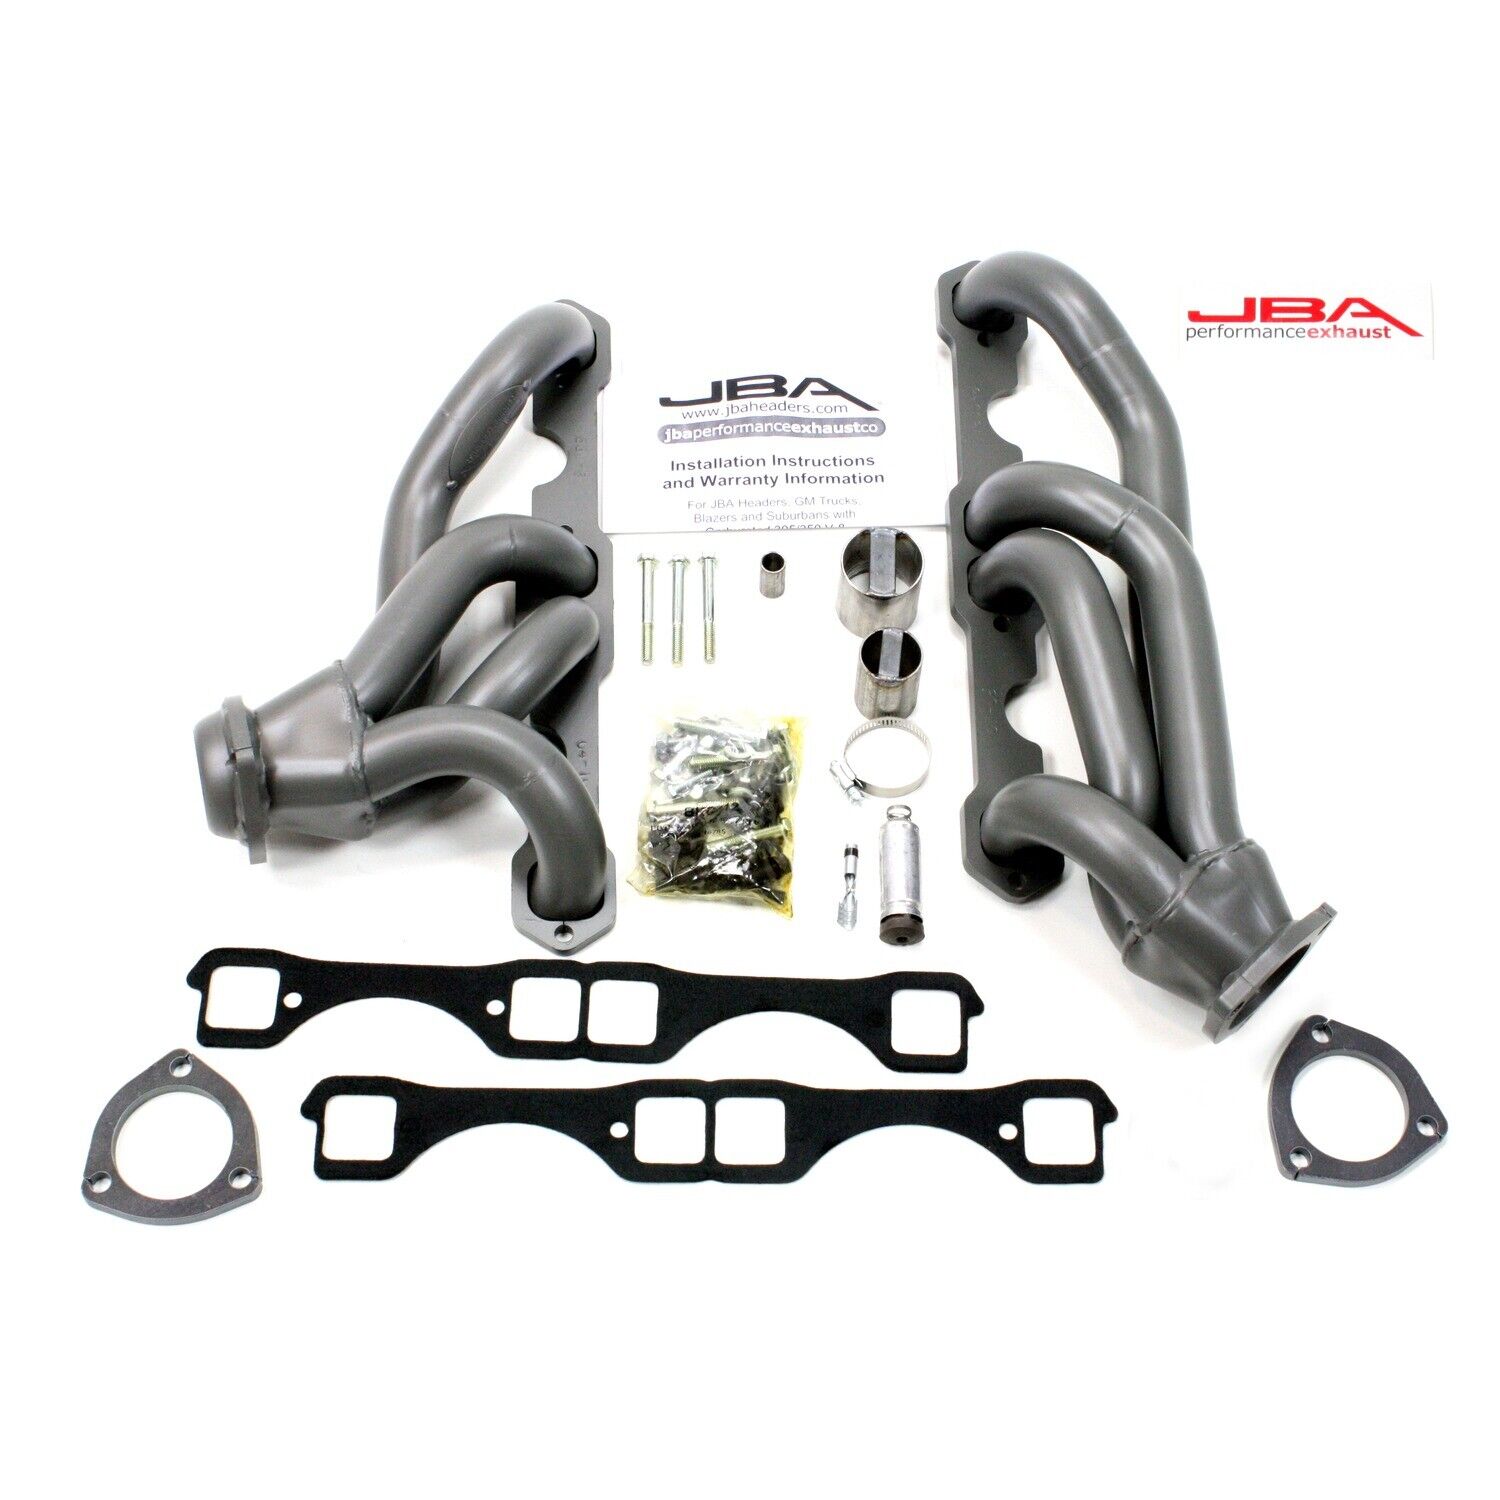 JBA Racing Headers Compatible with/Replacement for Chevrolet, Compatible